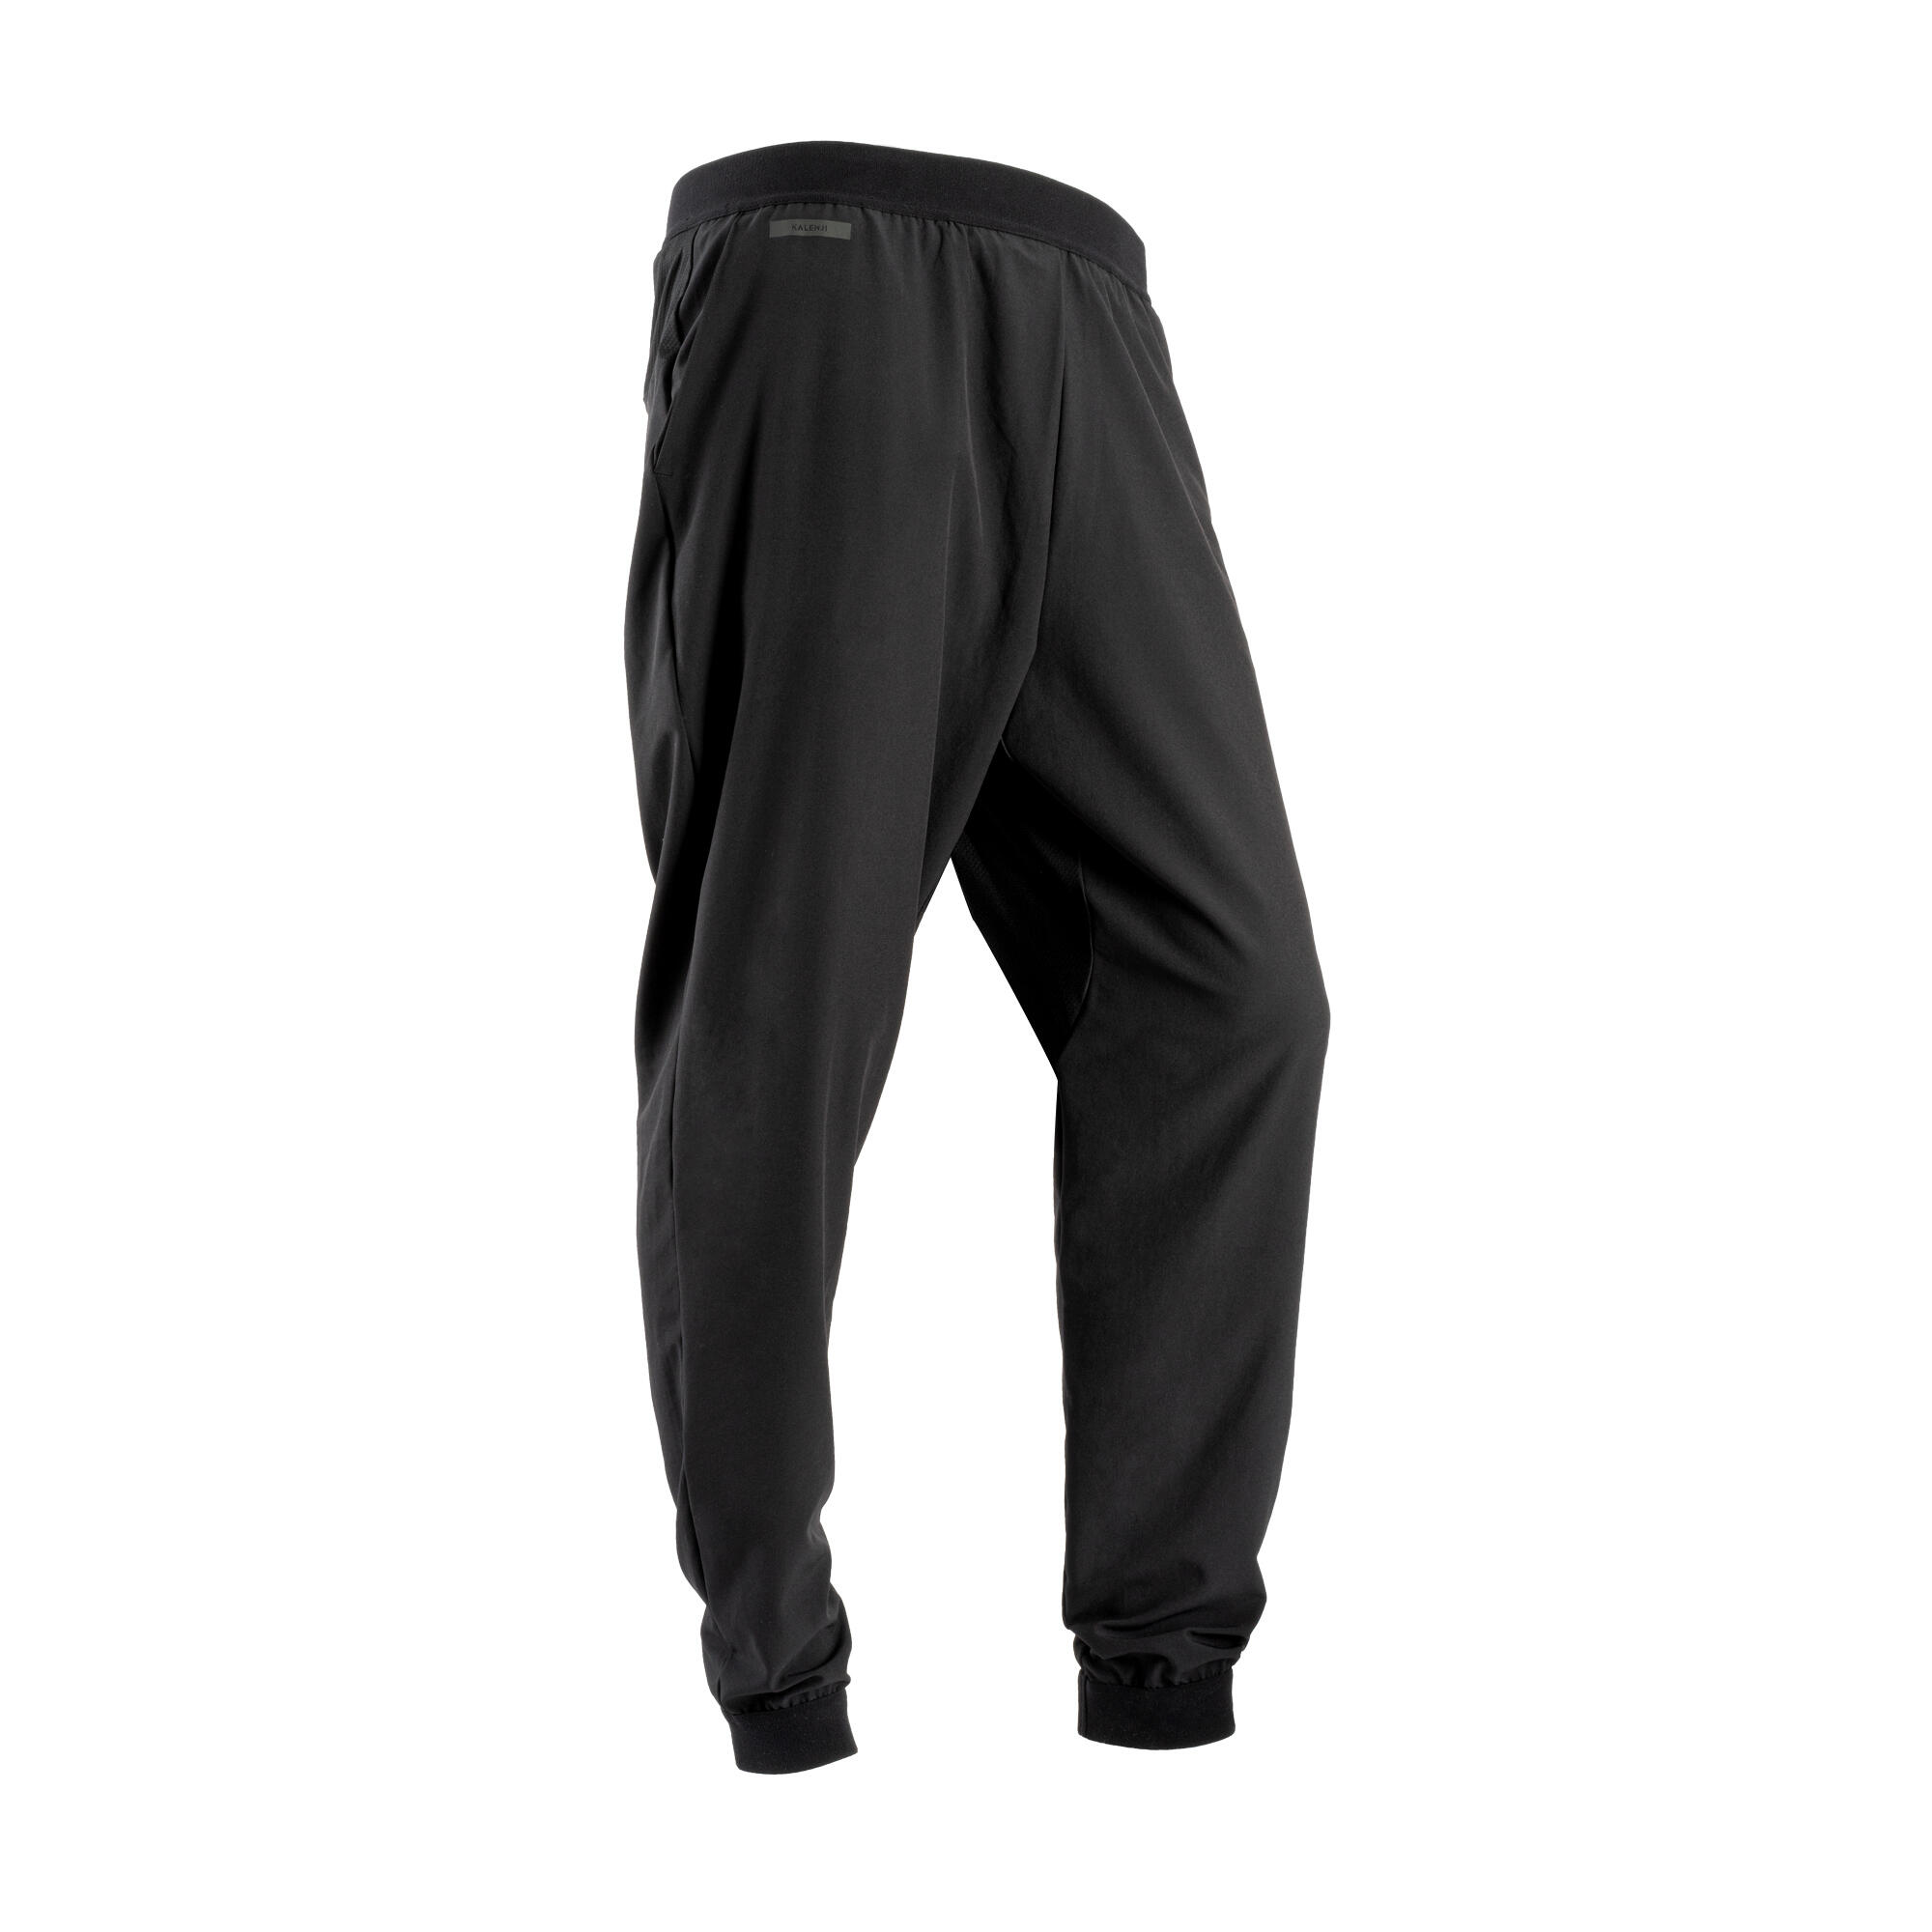 QUECHUA Forclaz 50 Men's Hiking Convertible Trousers By Decathlon - Buy  QUECHUA Forclaz 50 Men's Hiking Convertible Trousers By Decathlon Online at  Best Prices in India on Snapdeal